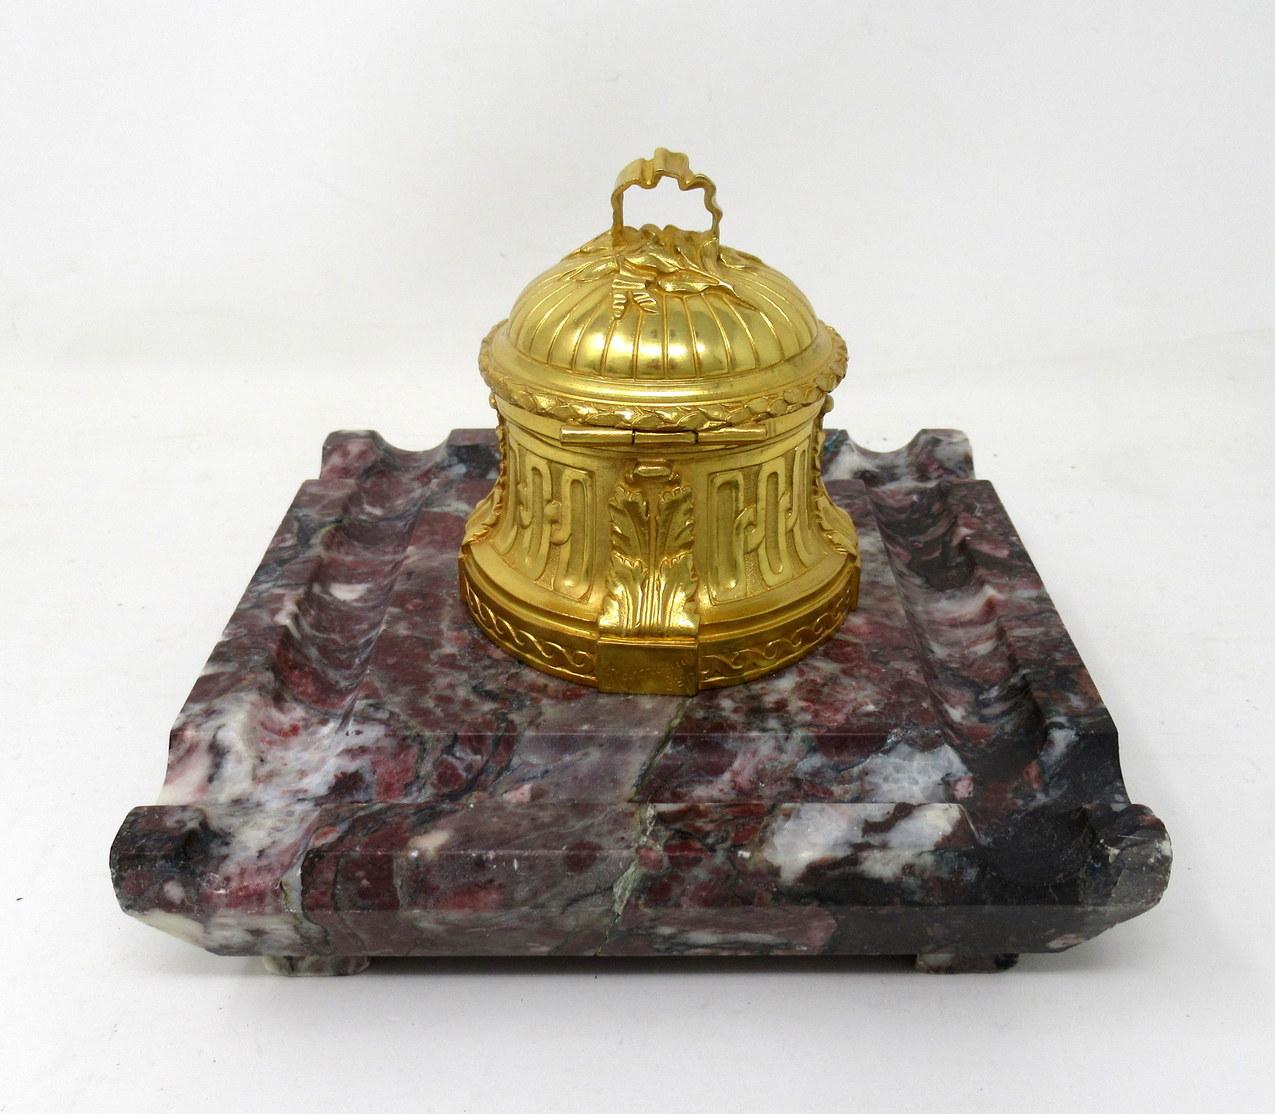 An exceptionally fine quality French heavy gauge ormolu bronze and well veined breche violette marble desk inkwell well of square outline, possible from the third quarter of the 19th century.

The central hinged lid and waisted bronze inkwell with